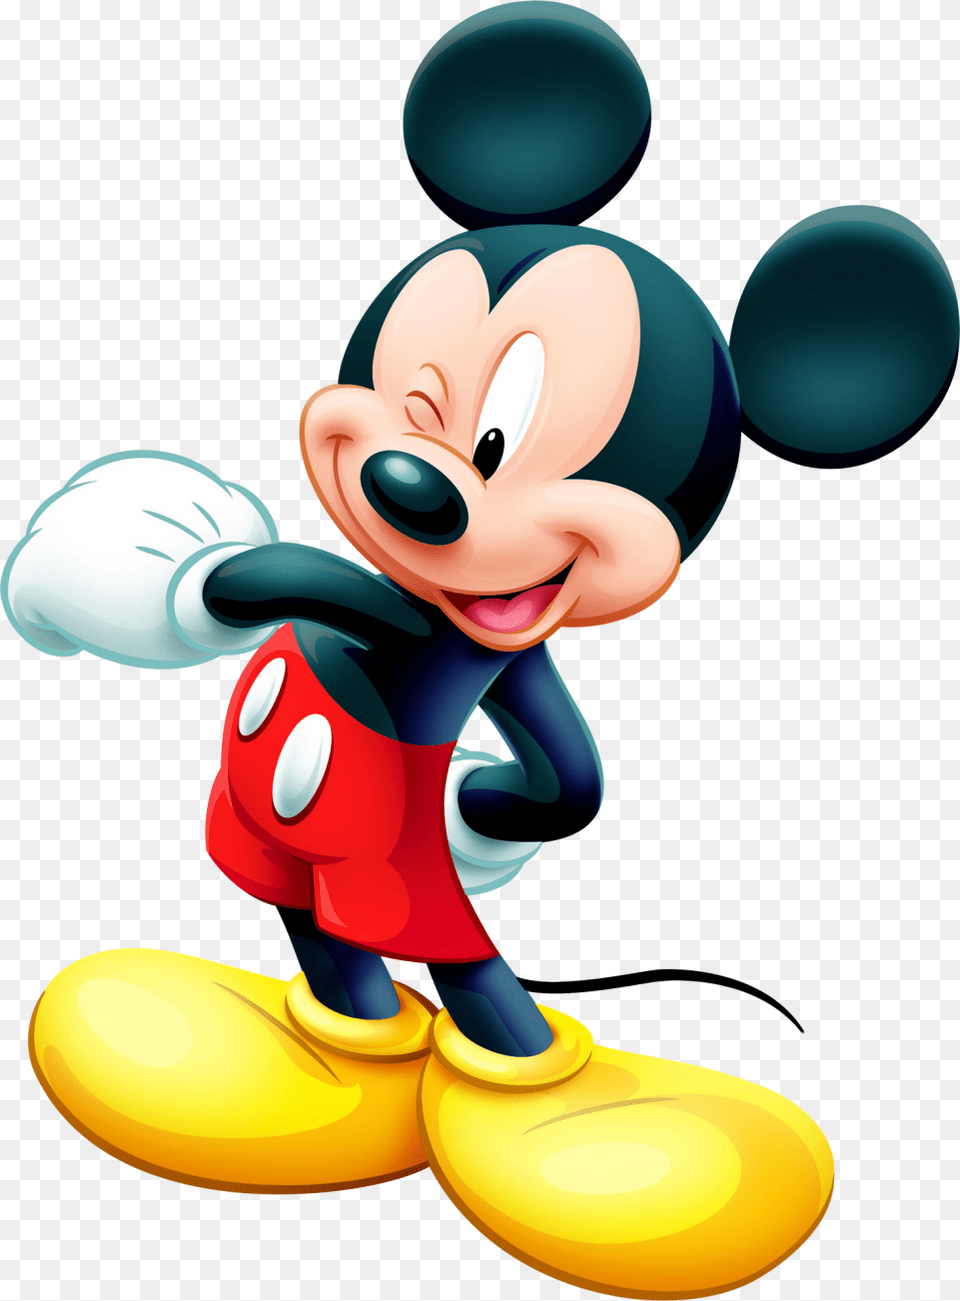 Mickey Mouse Image Mickey Mouse, Cartoon, Nature, Outdoors, Snow Png